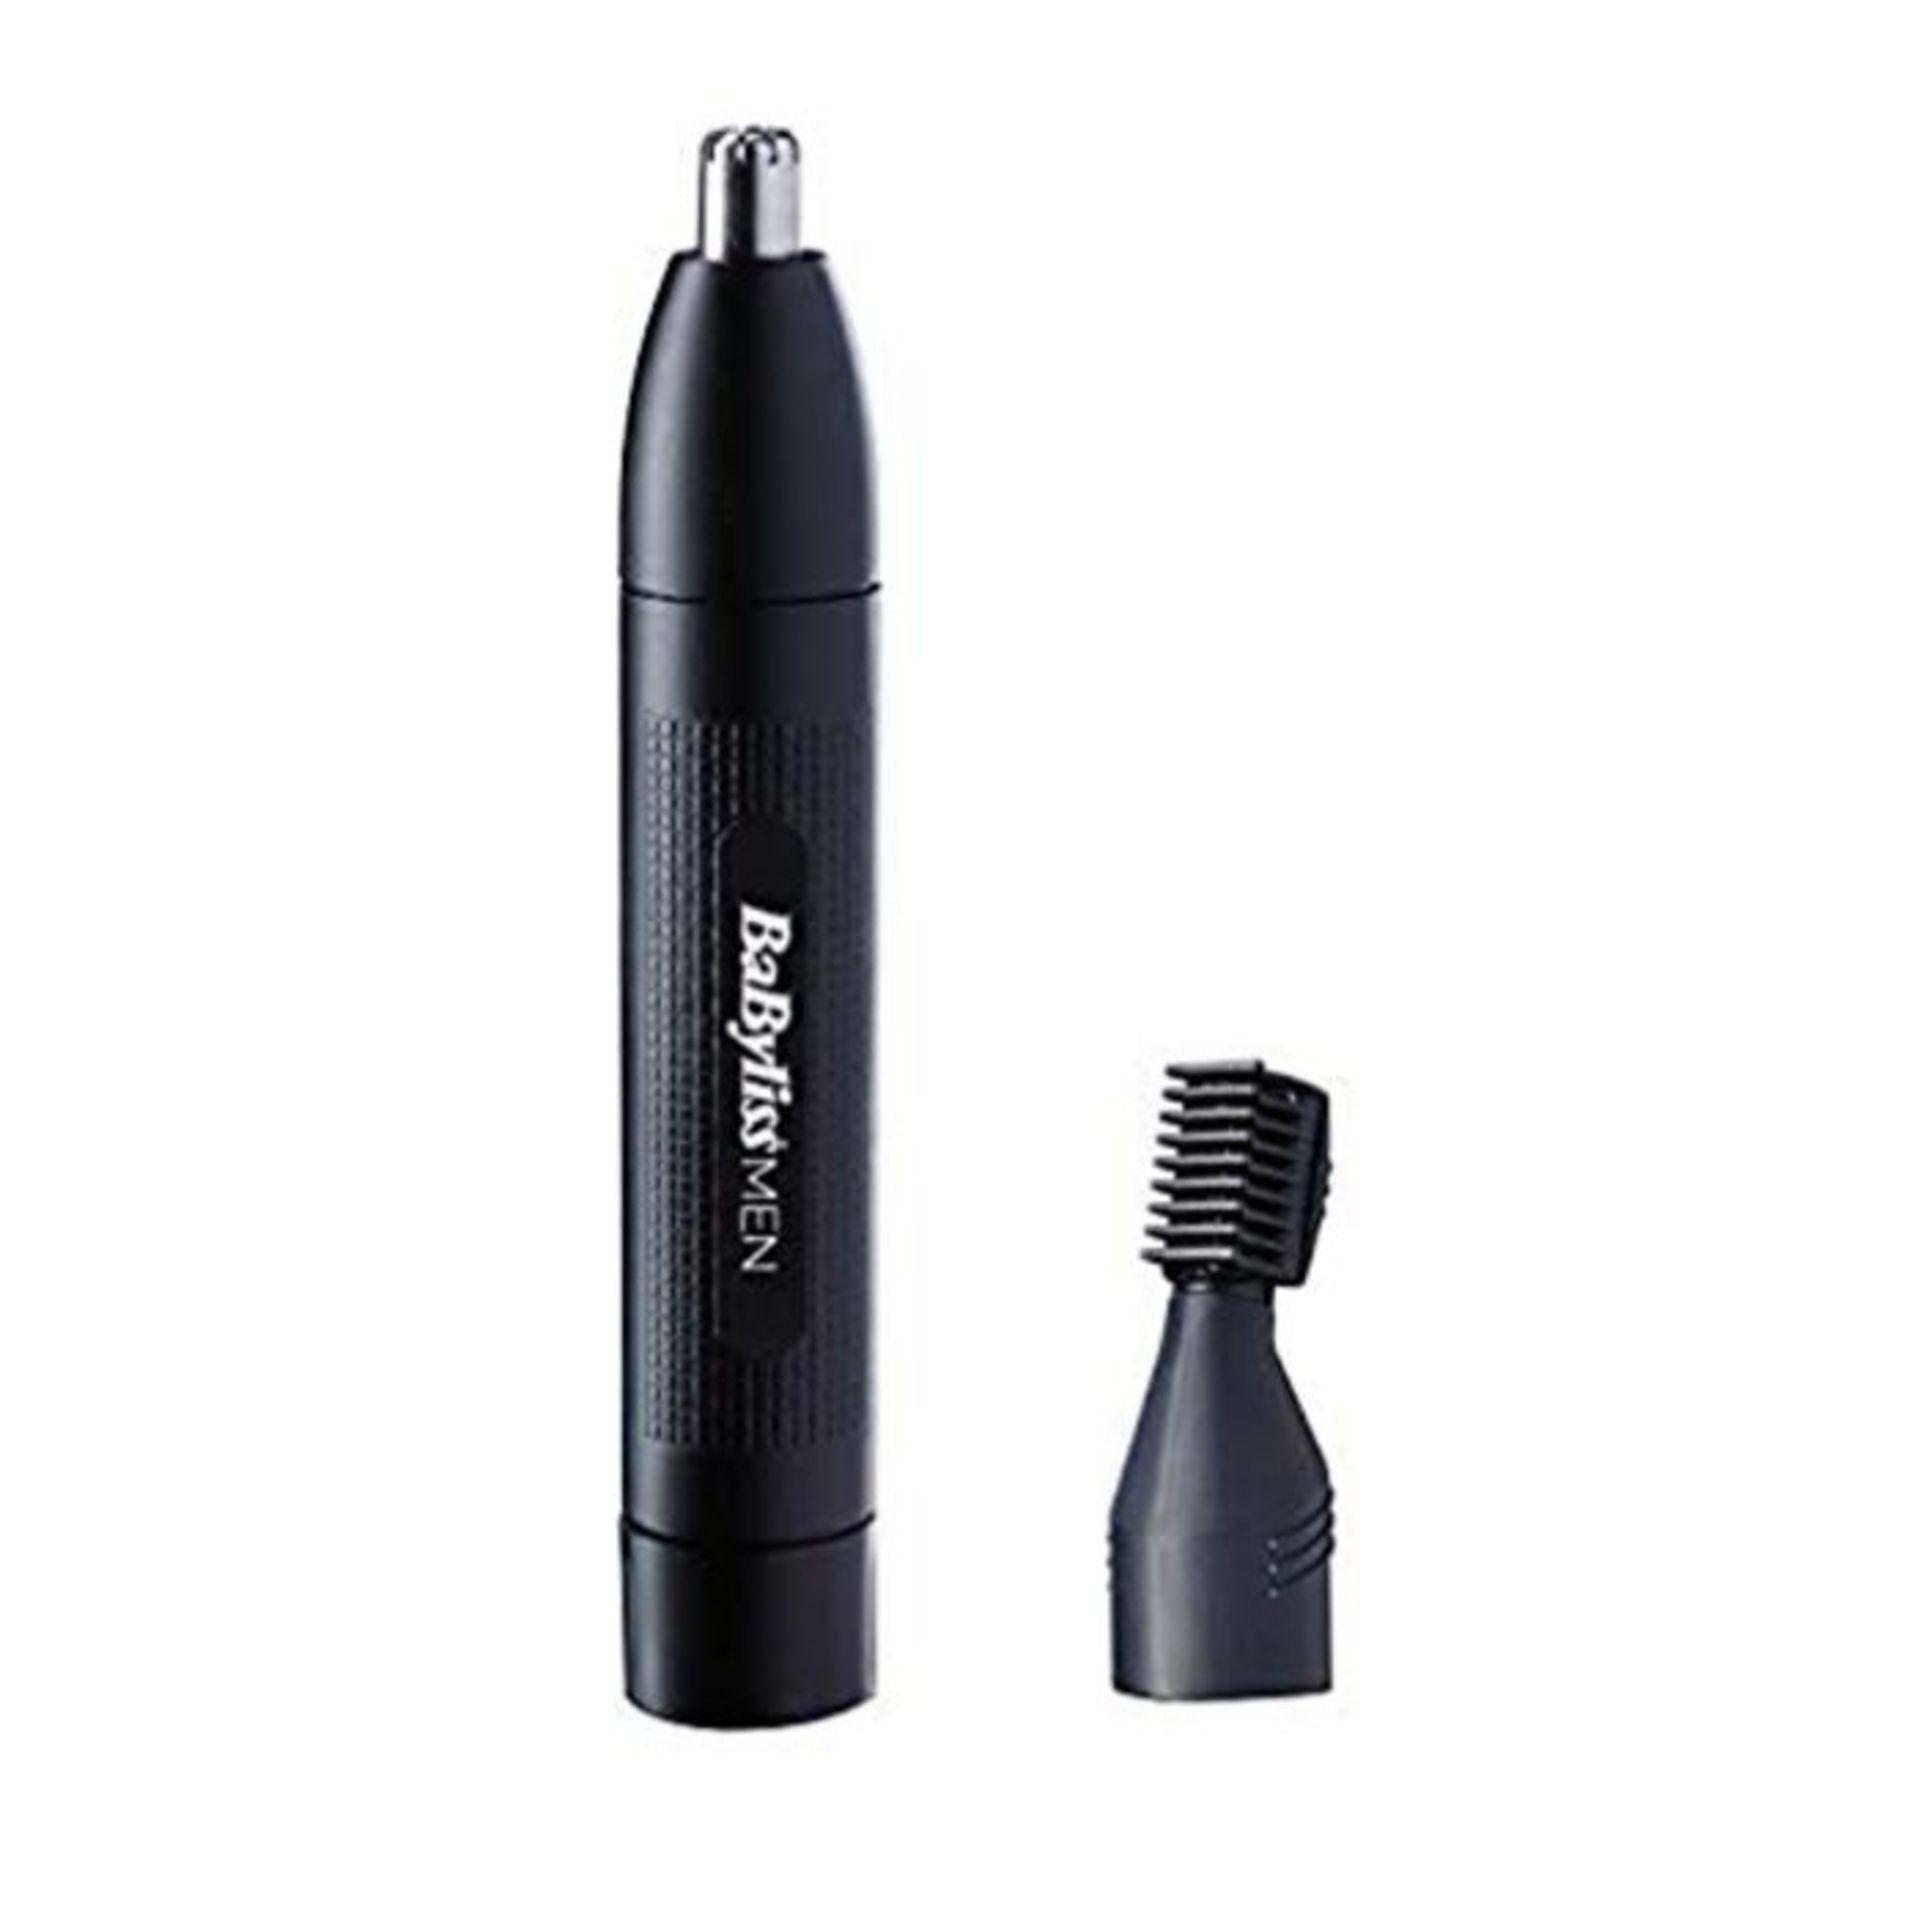 BaByliss Men E652E Nose and Ear Trimmer with Eyebrow Attachment